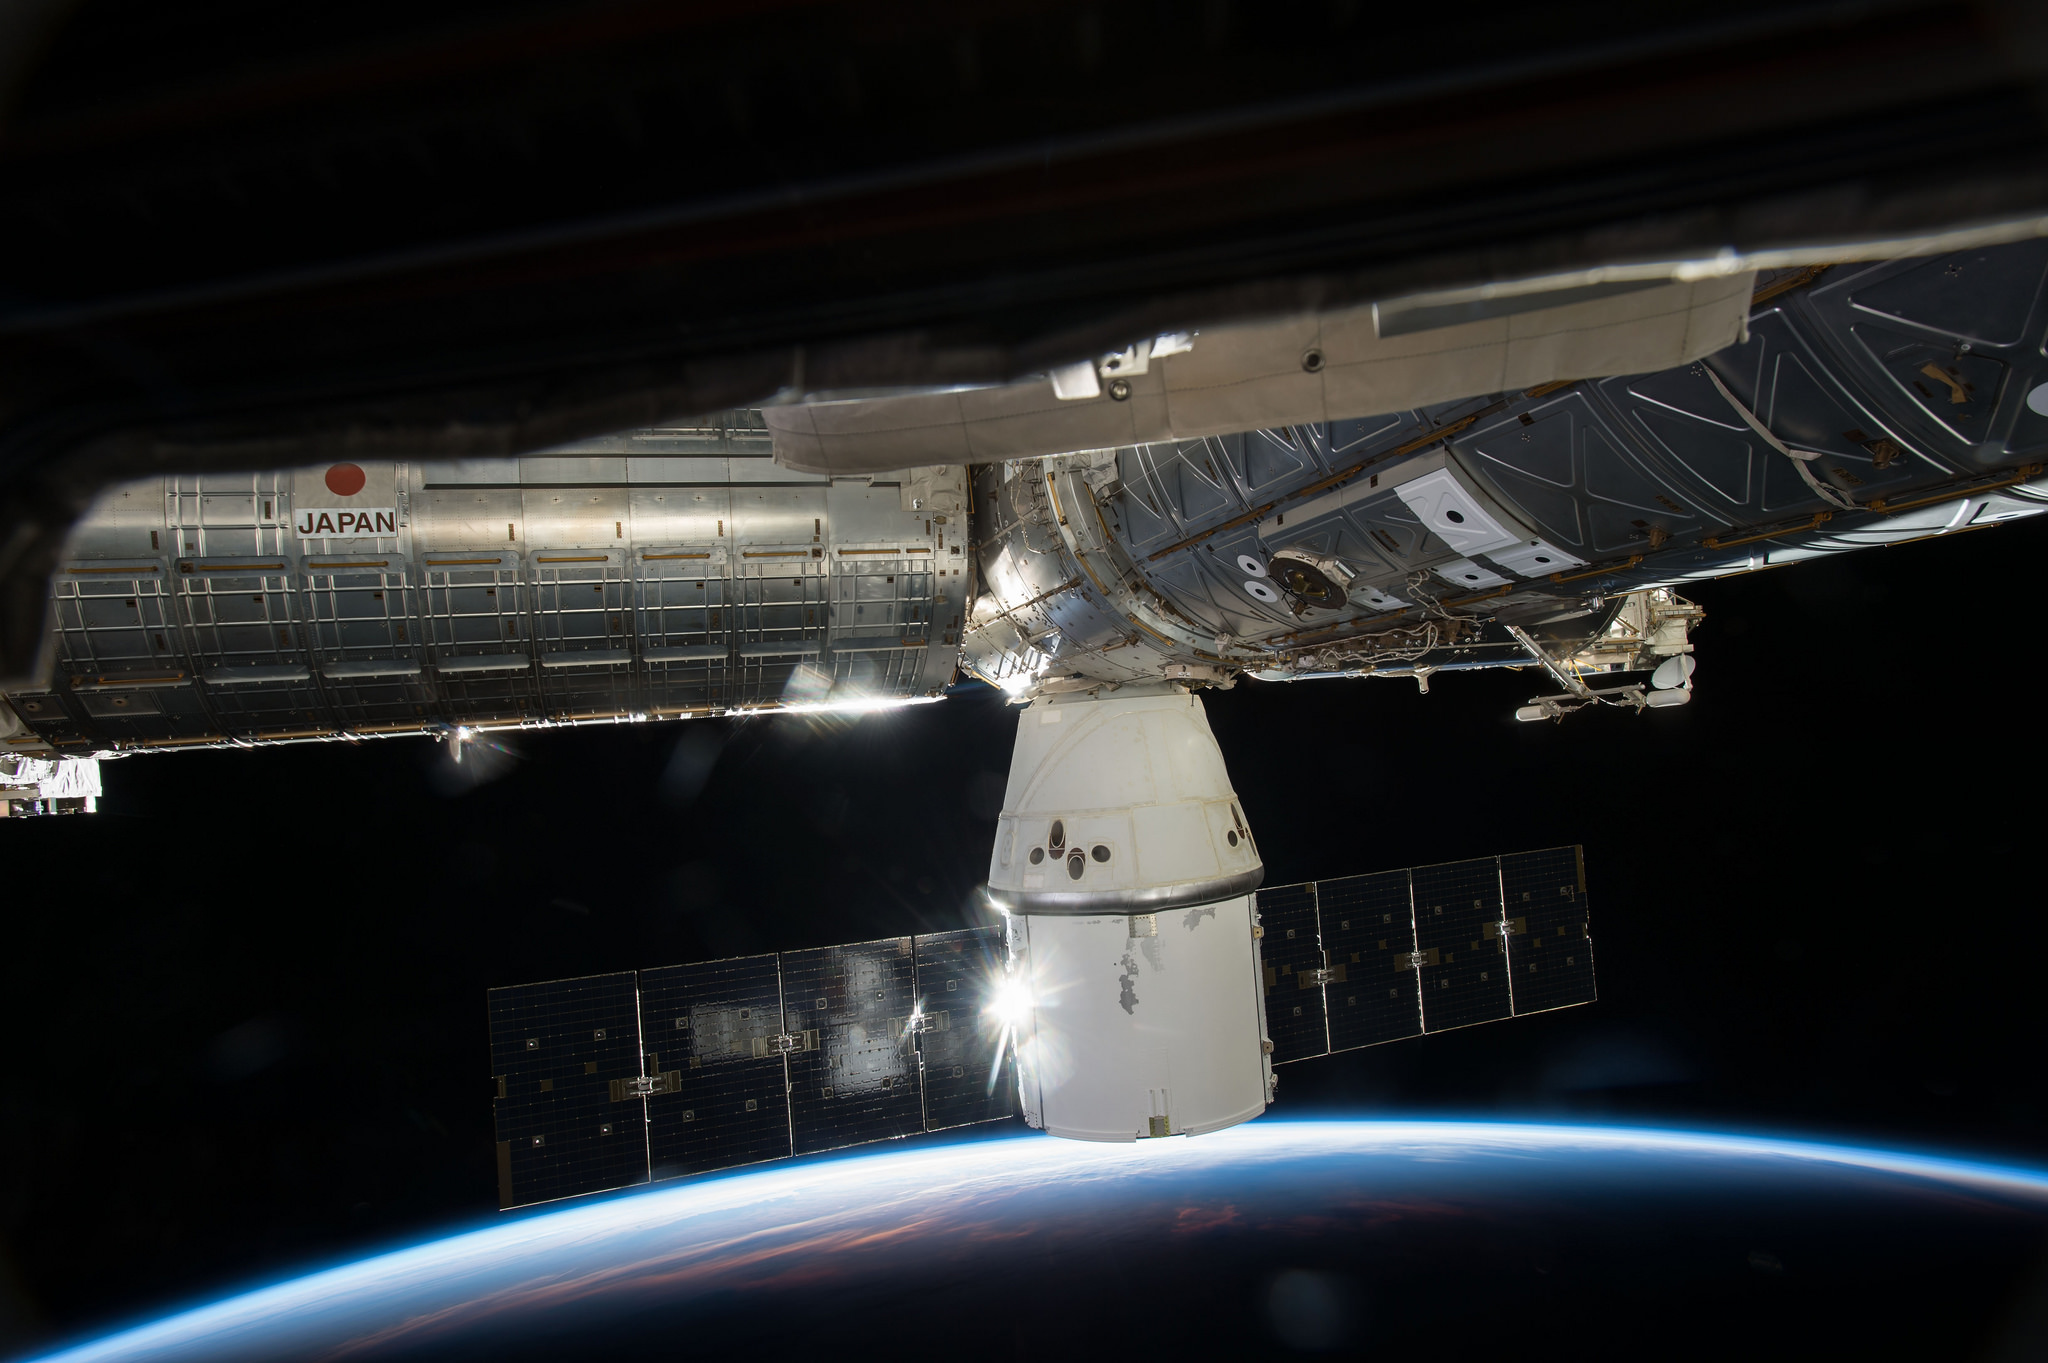 SpaceX's Dragon cargo capsule is seen here docked to the ISS